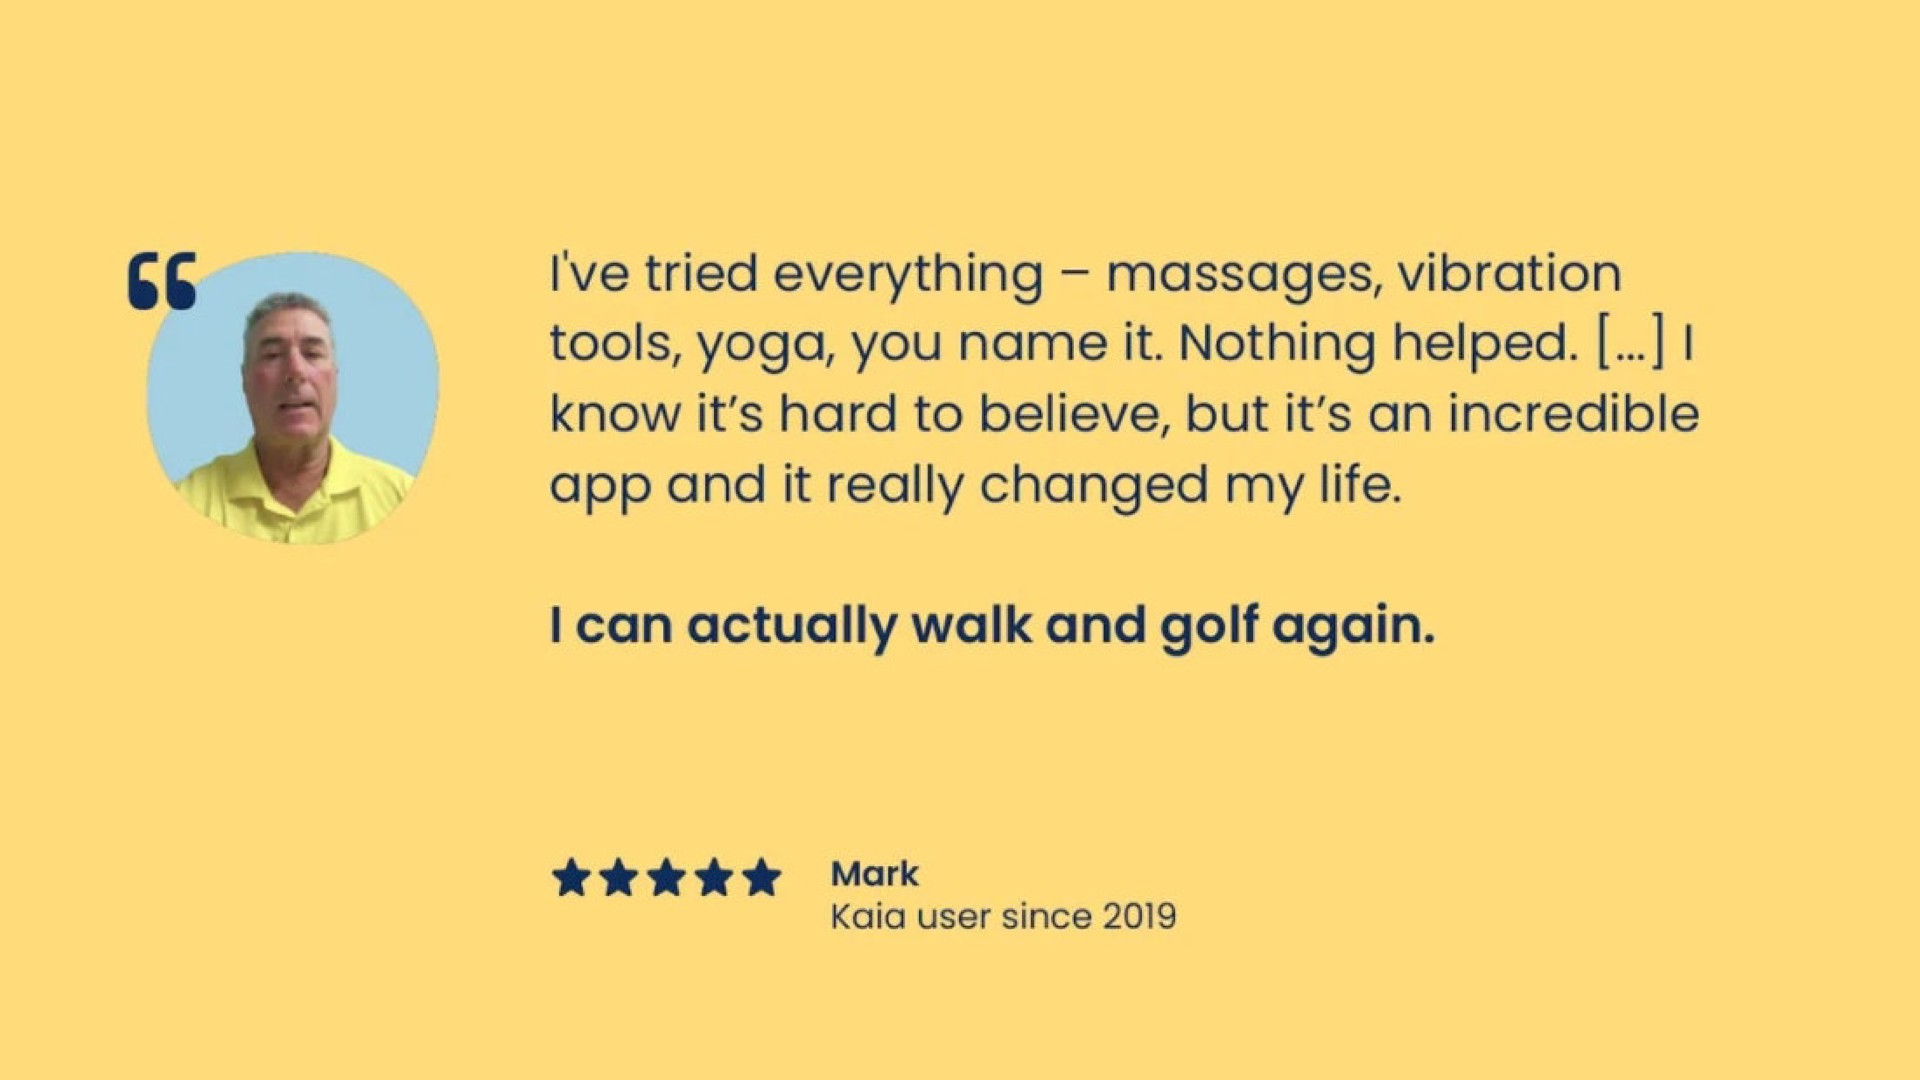 i tried everything massages vibration tools yoga you name it nothing helped know it hard to believe but it an incredible and it really changed my life can actually walk and golf again mark | Kaia Health